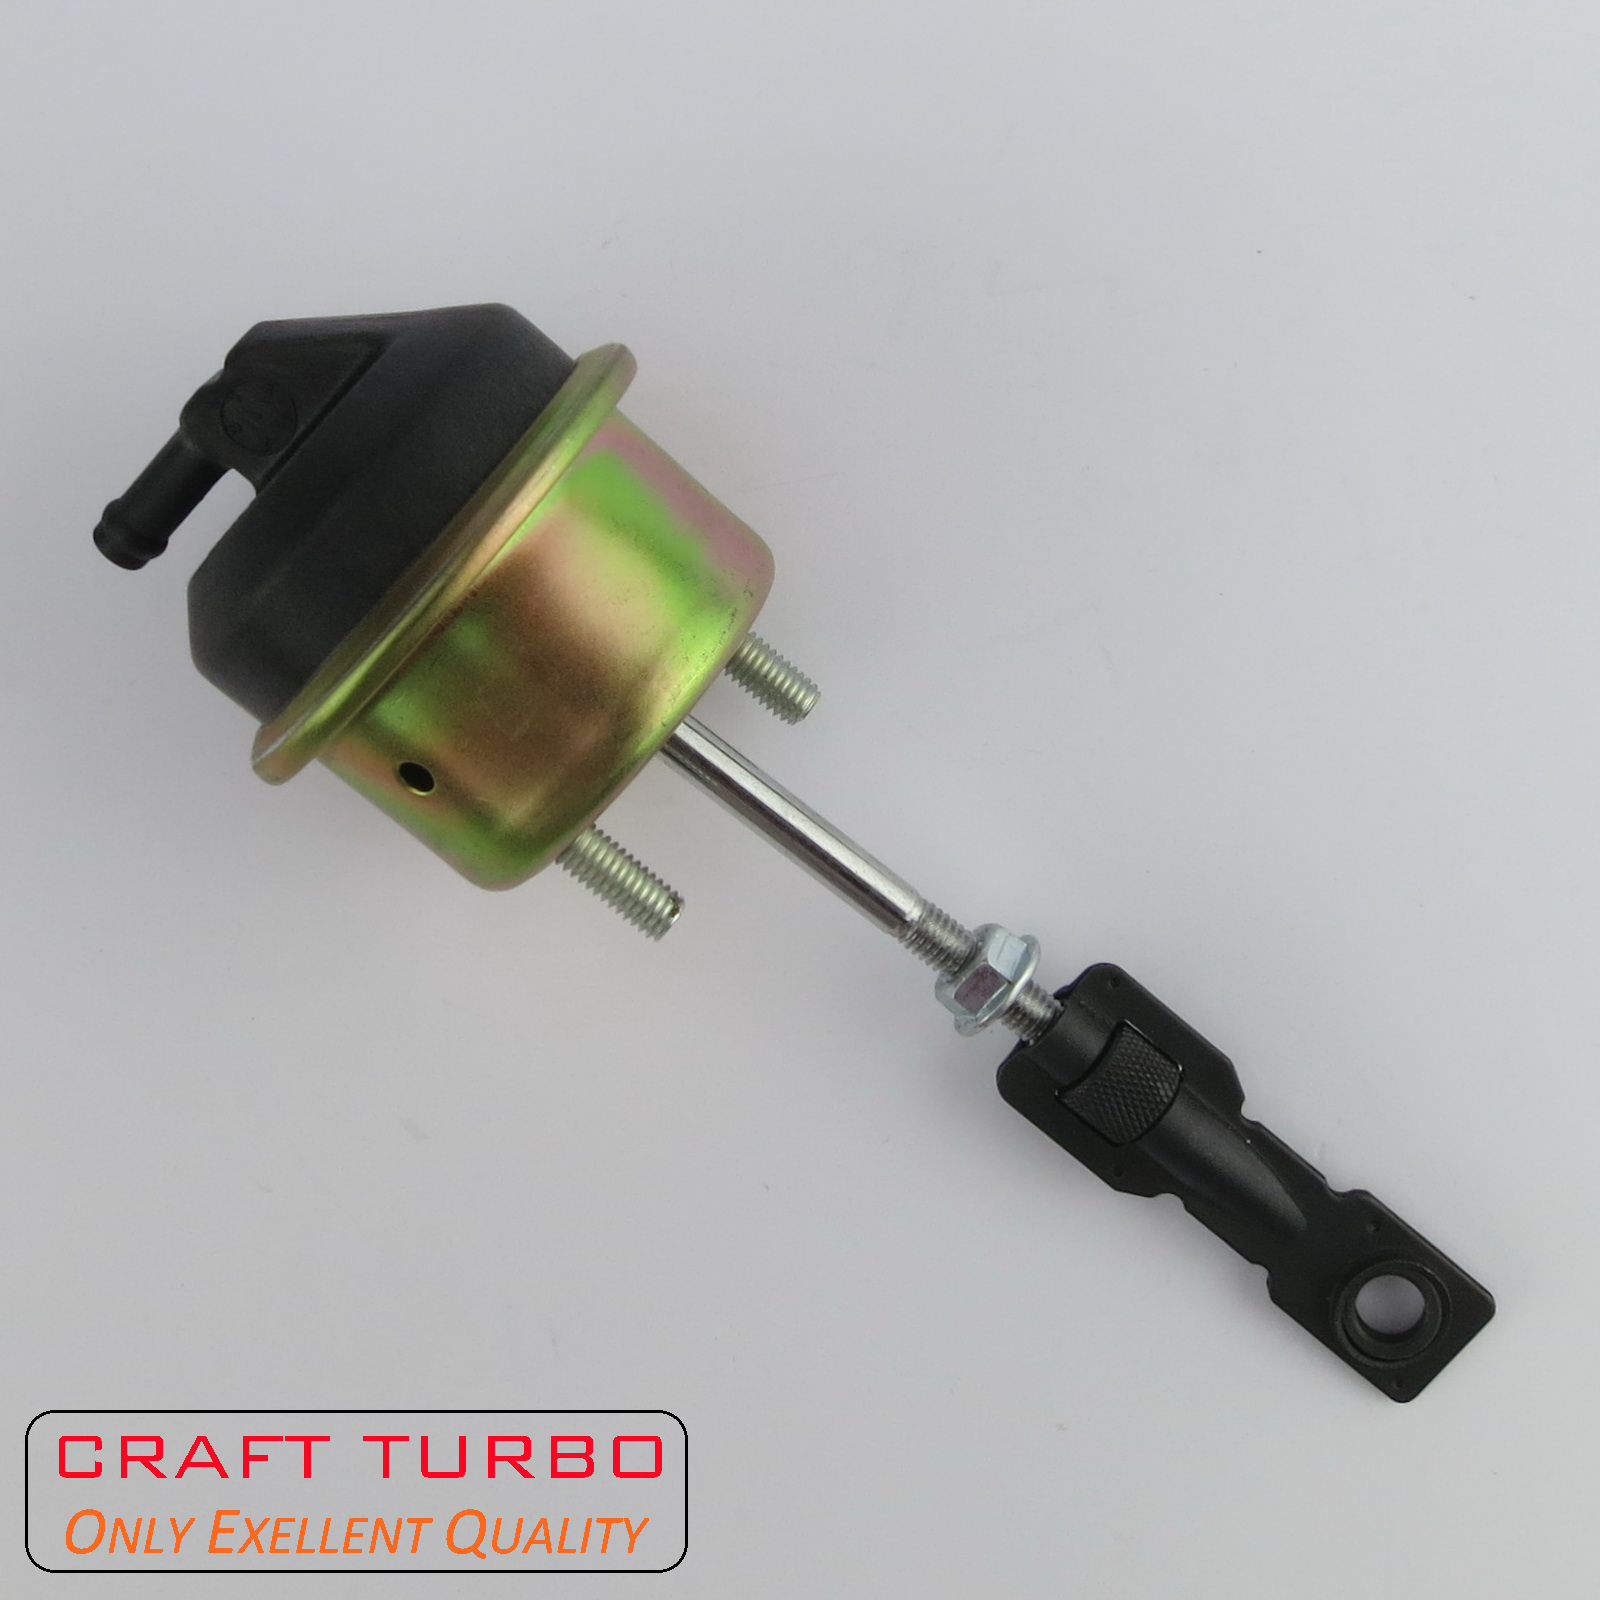 GT1544 Actuator for Turbochargers